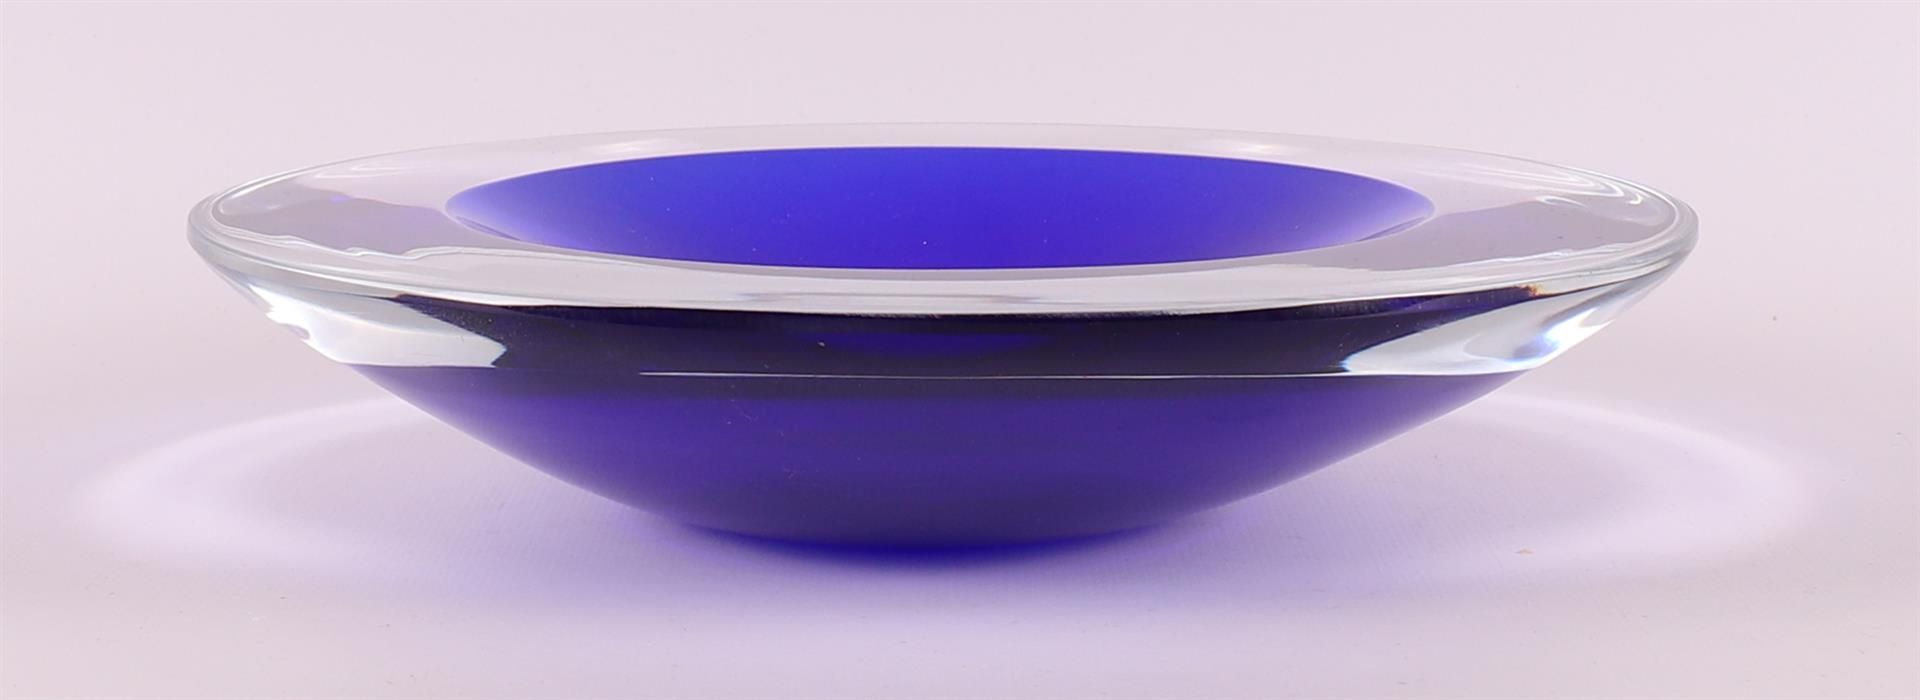 A blue and clear glass 'Crystal Graal Design' serica bowl, Olaf Stevens 1999 - Image 2 of 4